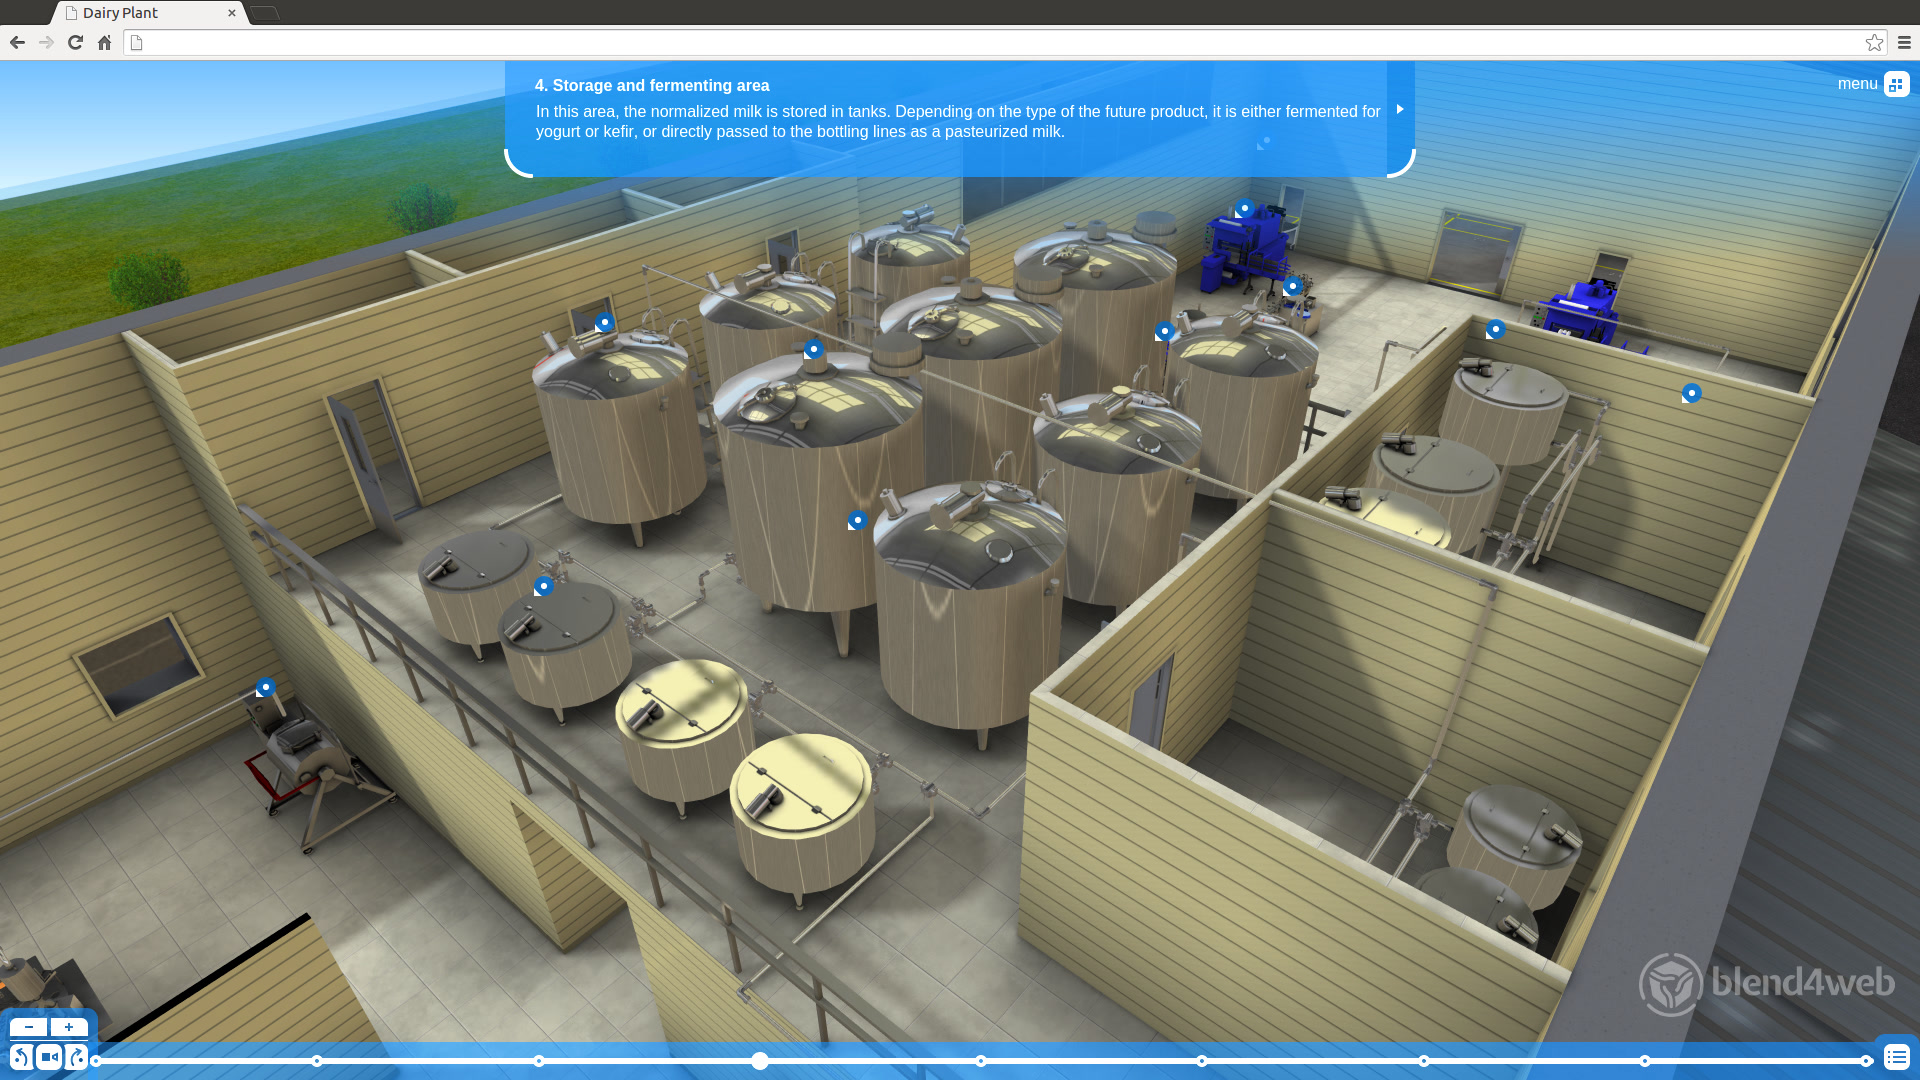 Dairy Plant preview 